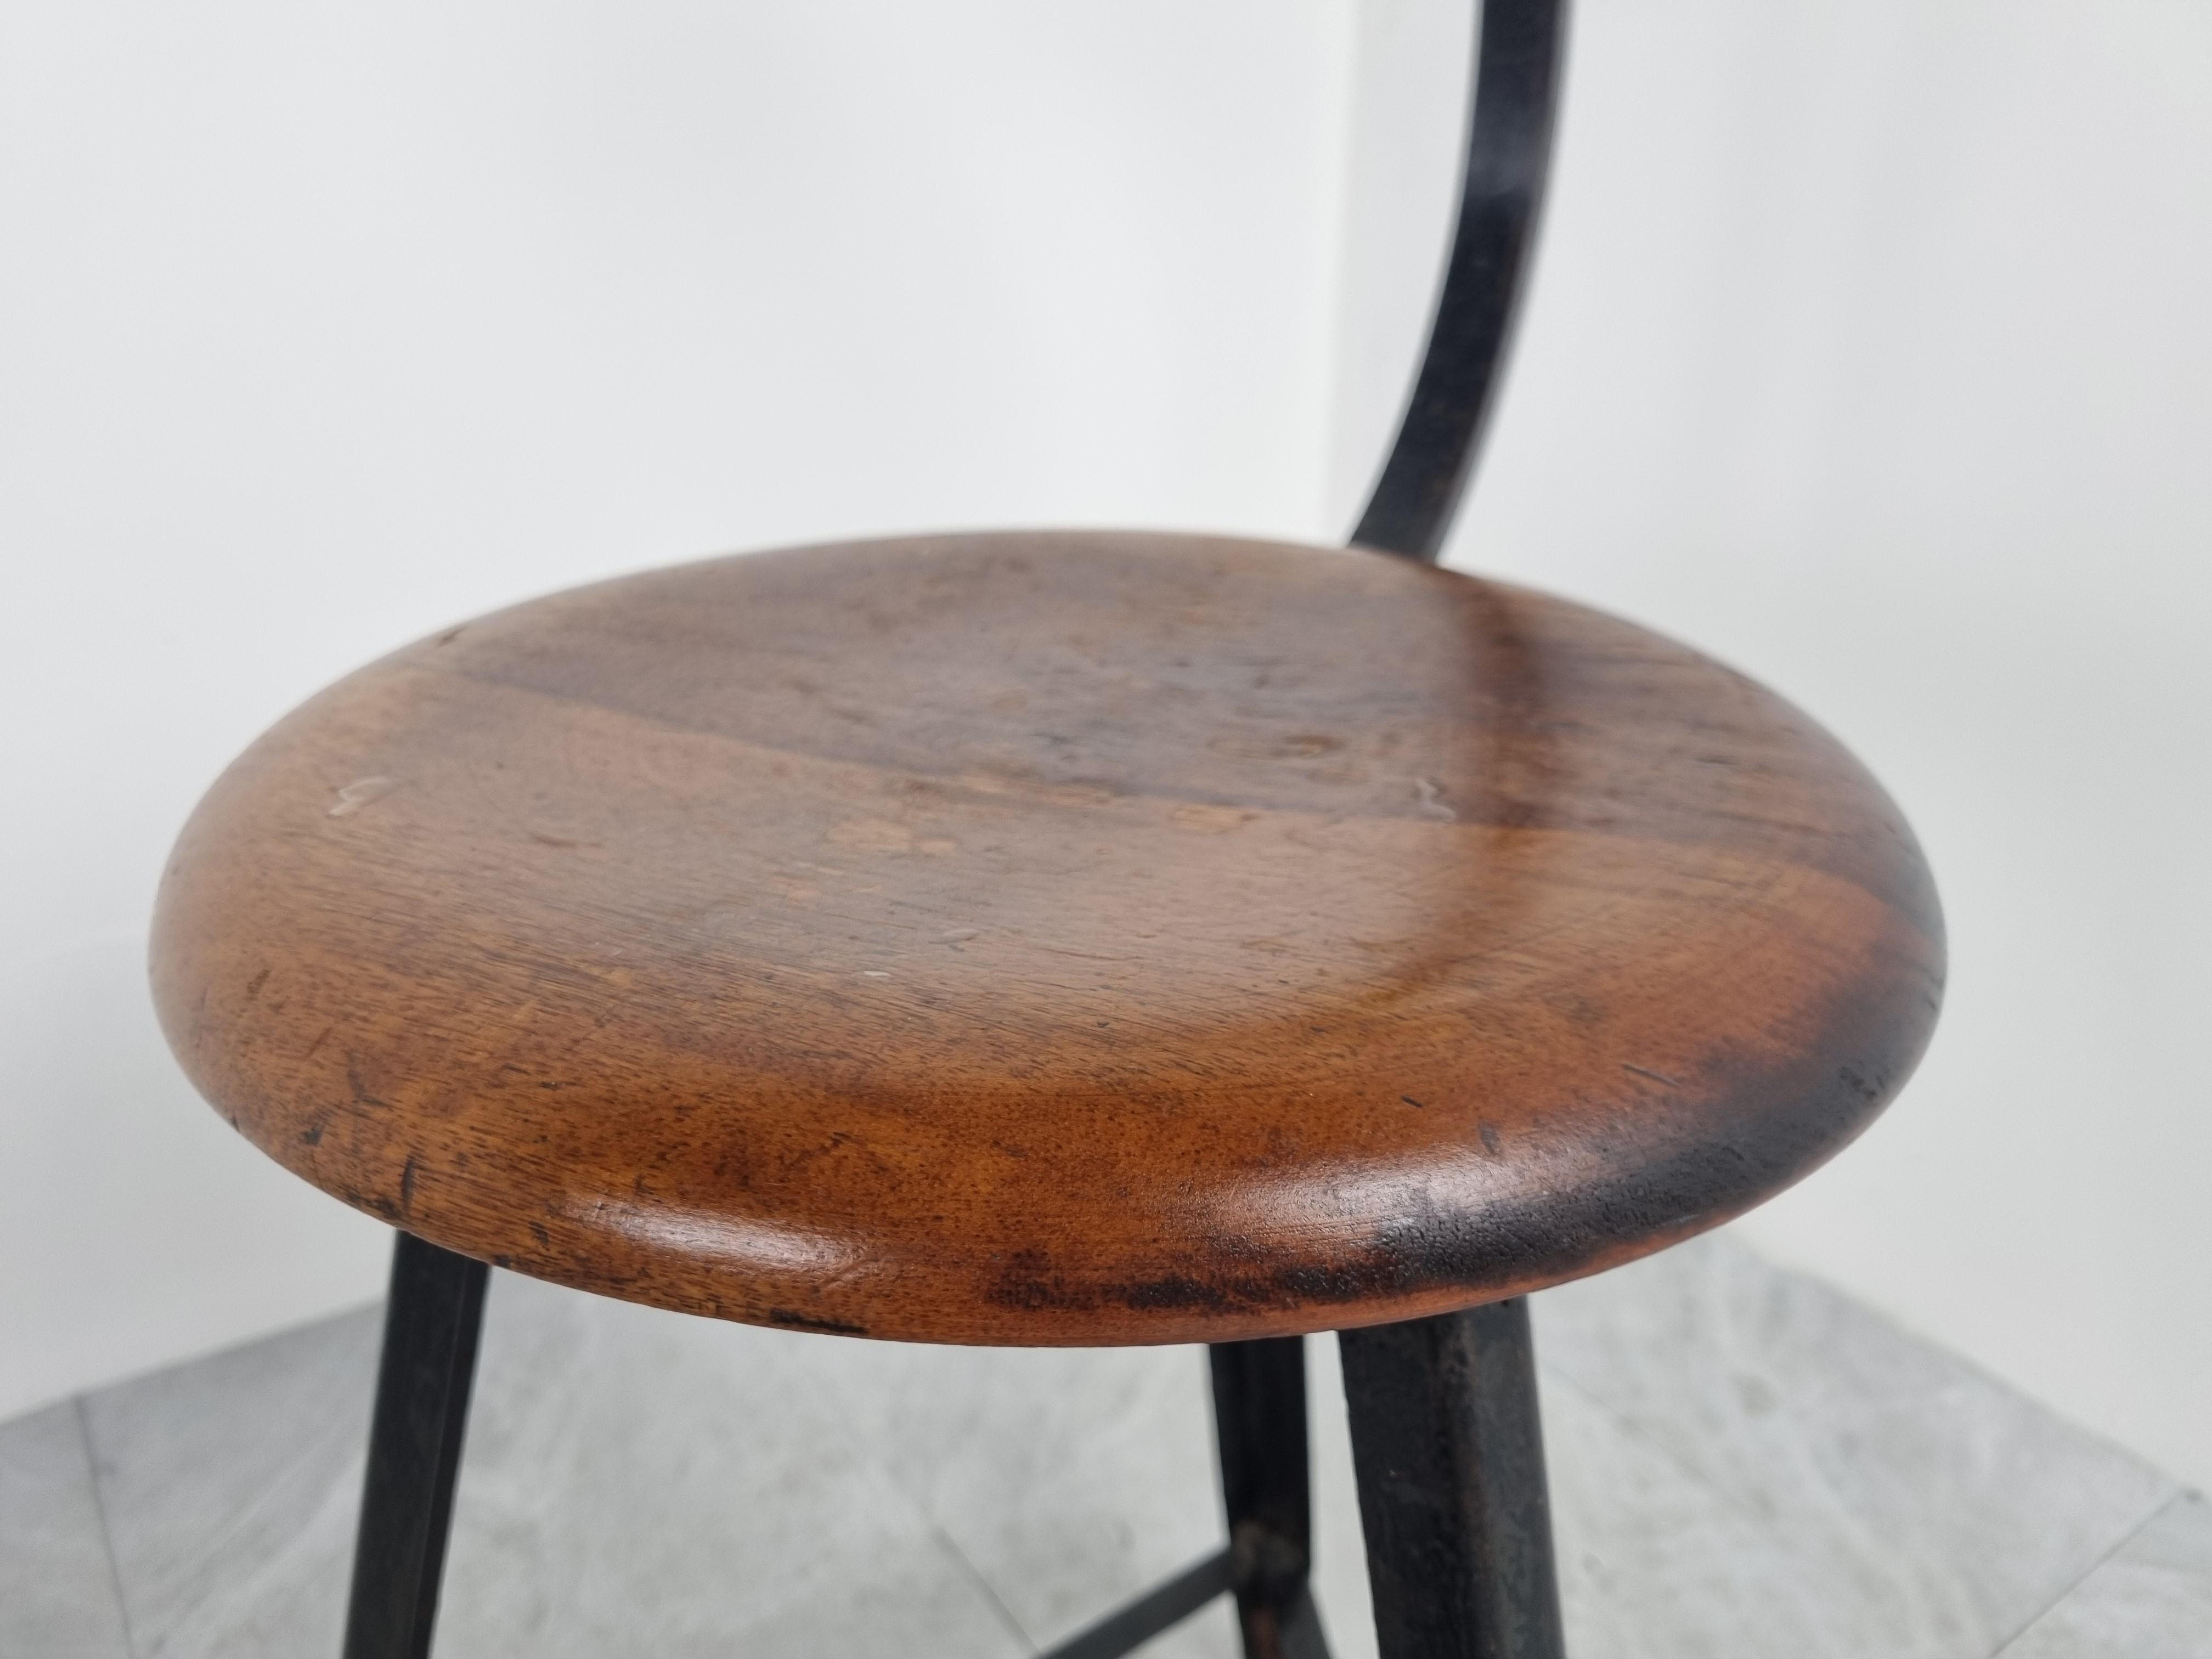 Great looking vintage tripod base factory stool with a backrest.

Made from a black metal base, anicely crafted round wooden seat and backrests.

Beautiful wear, even with an original sticker from the Brussels based manufacturer.

1950s -